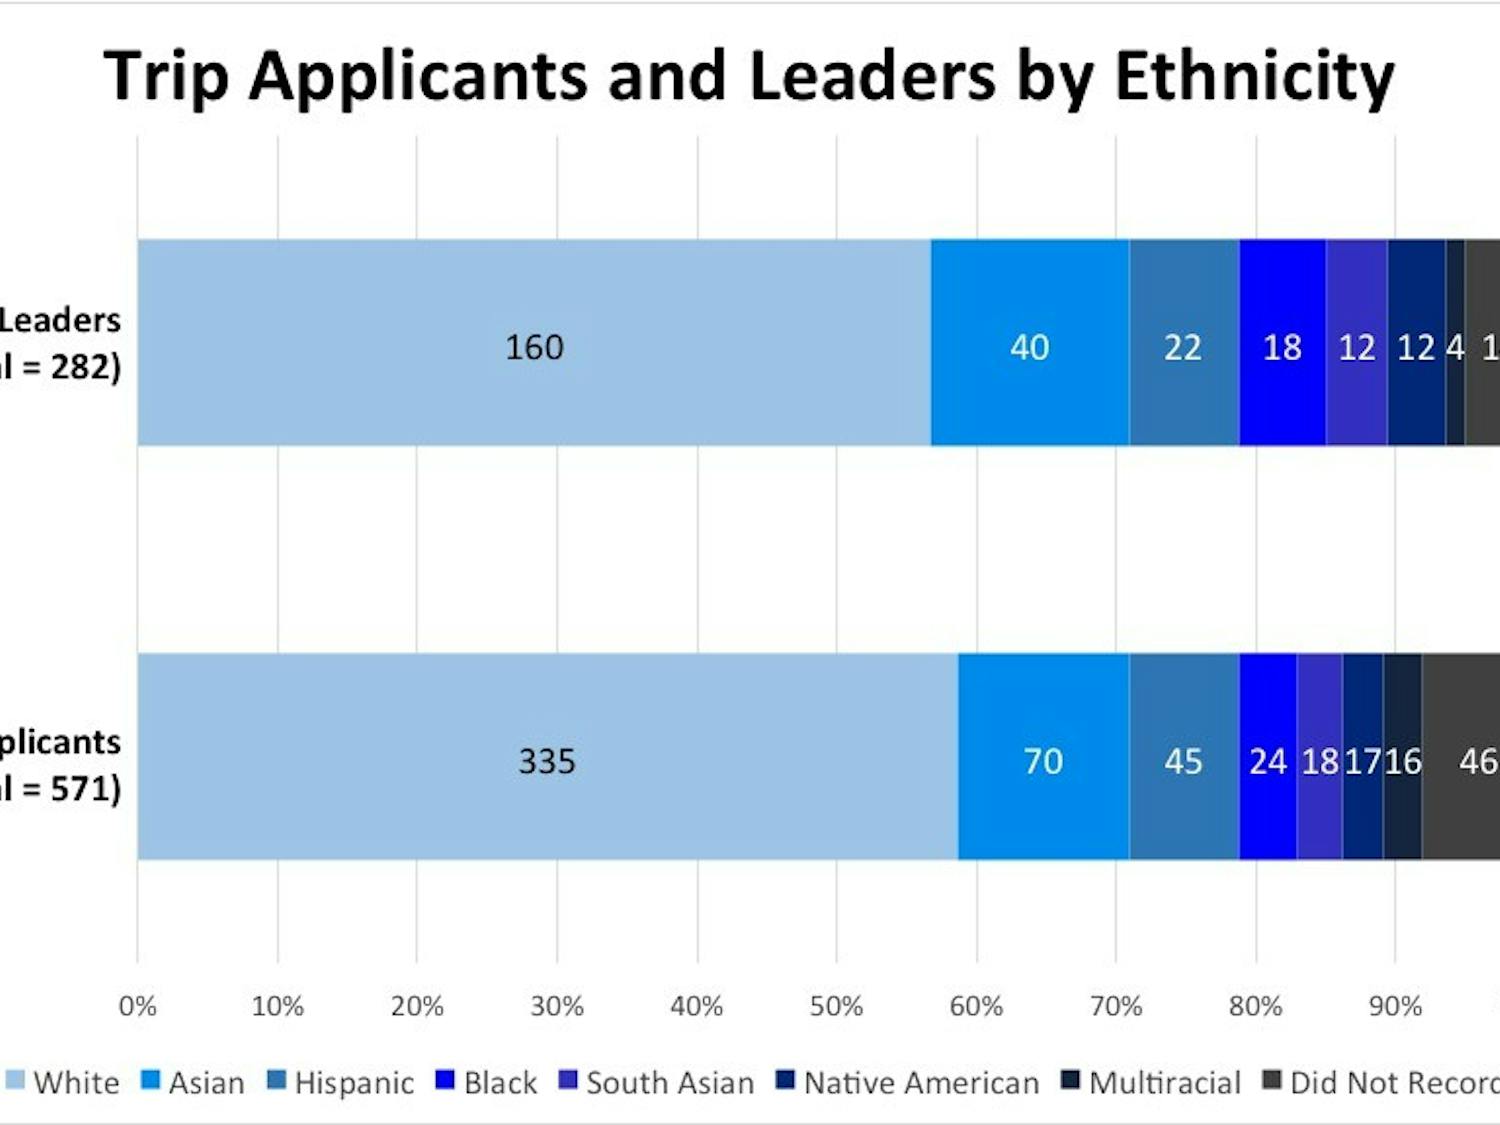 Applicants who applied for both Trip leader and Croo volunteer and were selected for Croo&nbsp;are not included in the Trip leader&nbsp;applicant total of 571.&nbsp;About 58 percent of Trip leaders and Trip leader&nbsp;applicants were white.